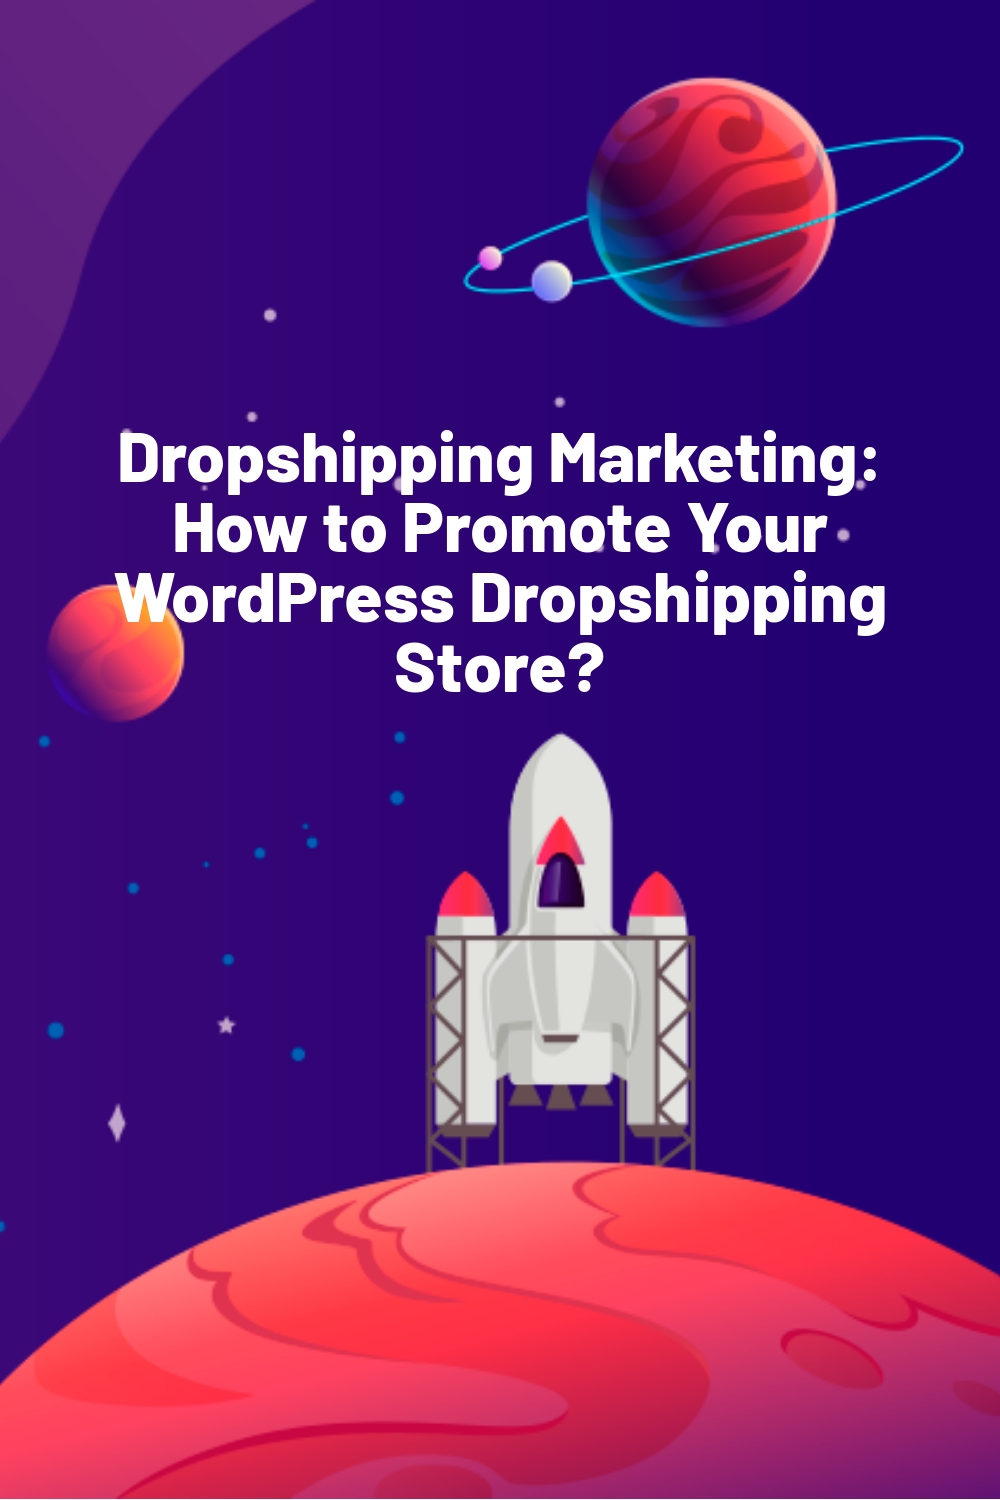 Dropshipping Marketing: How to Promote Your WordPress Dropshipping Store?